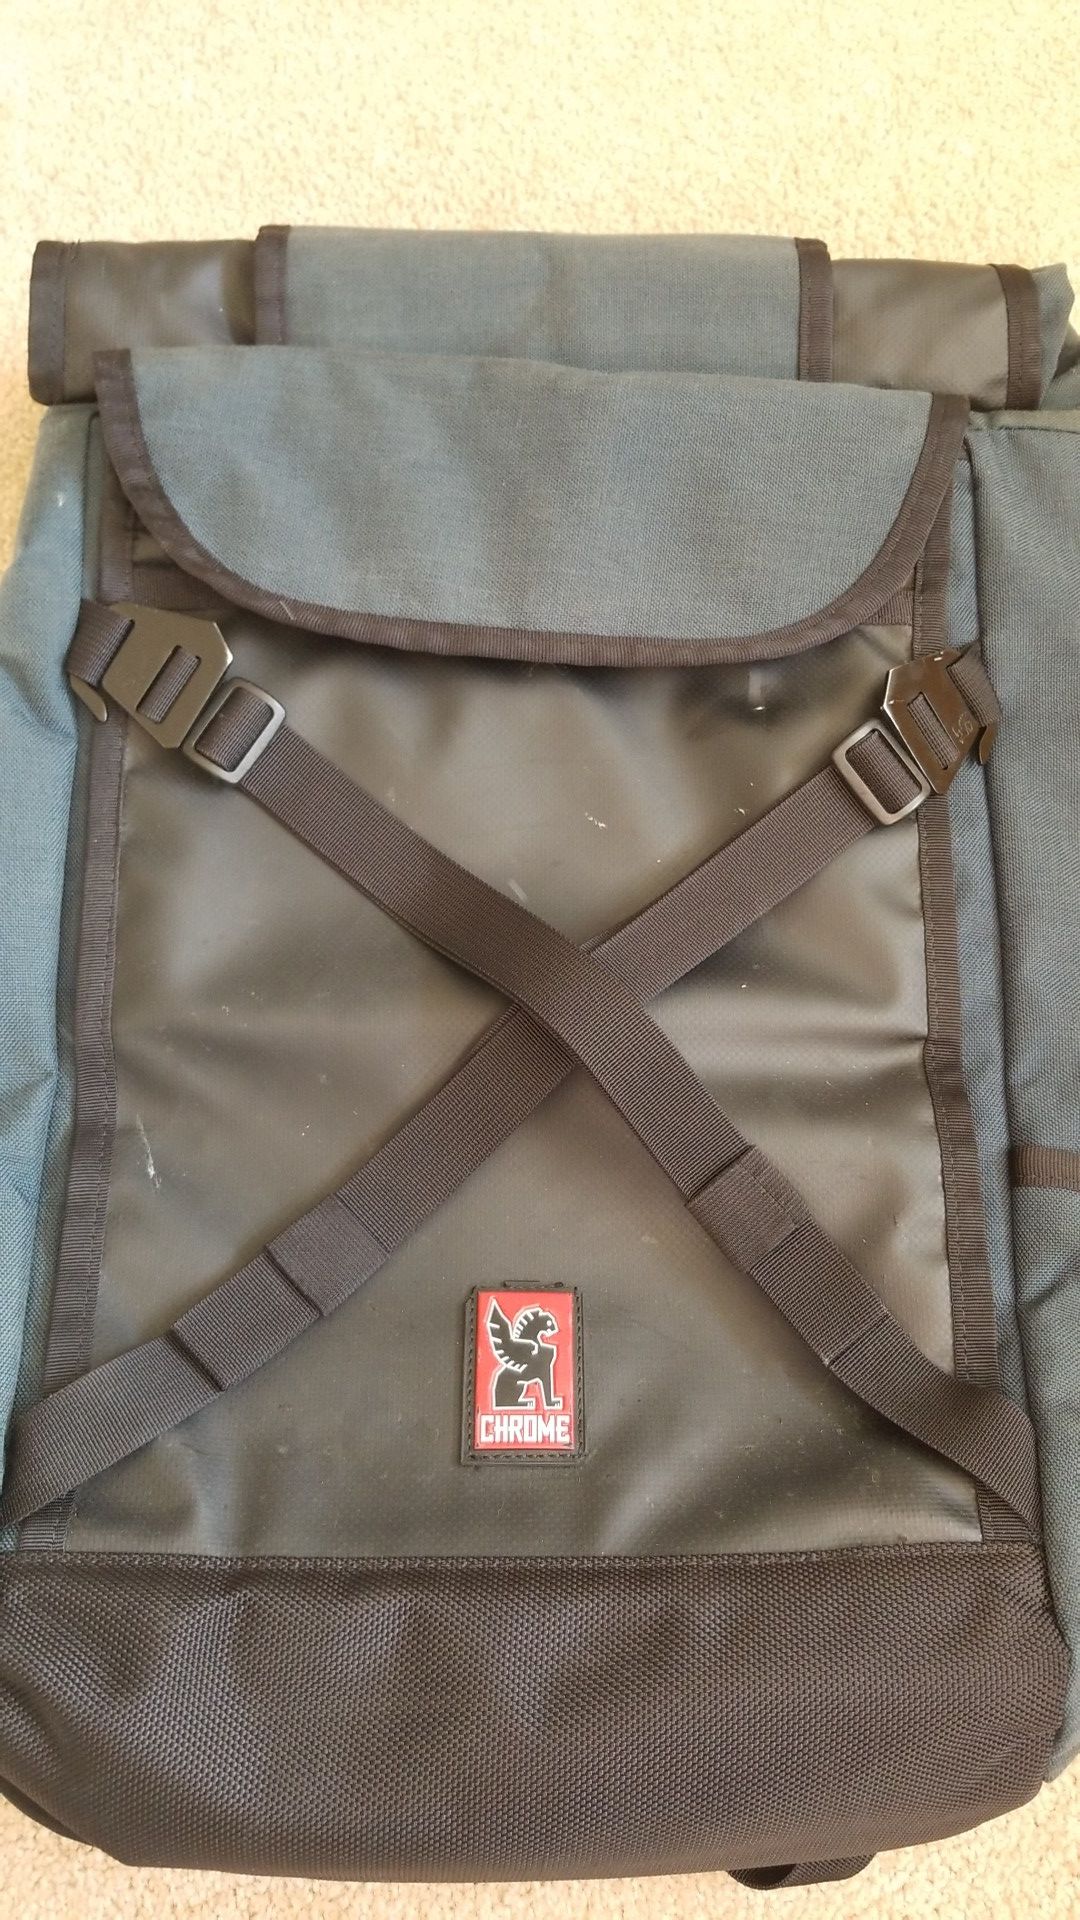 Chrome wet-dry backpack with padded computer compartment